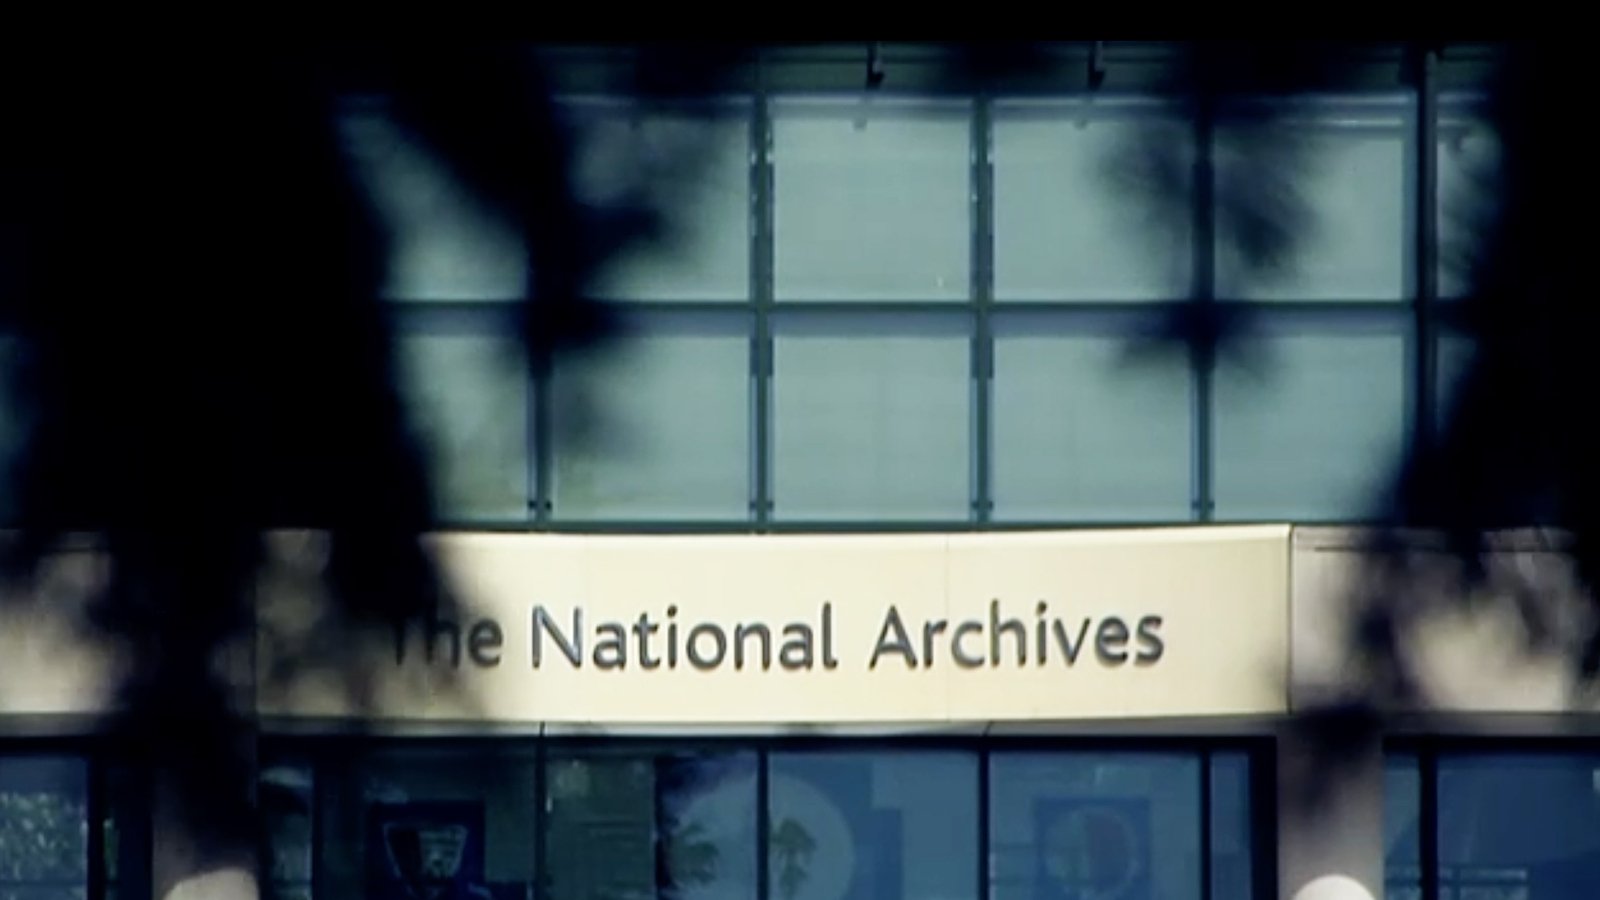 Image - RTÉ Investigates inspected the Rees Memo in the UK National Archives